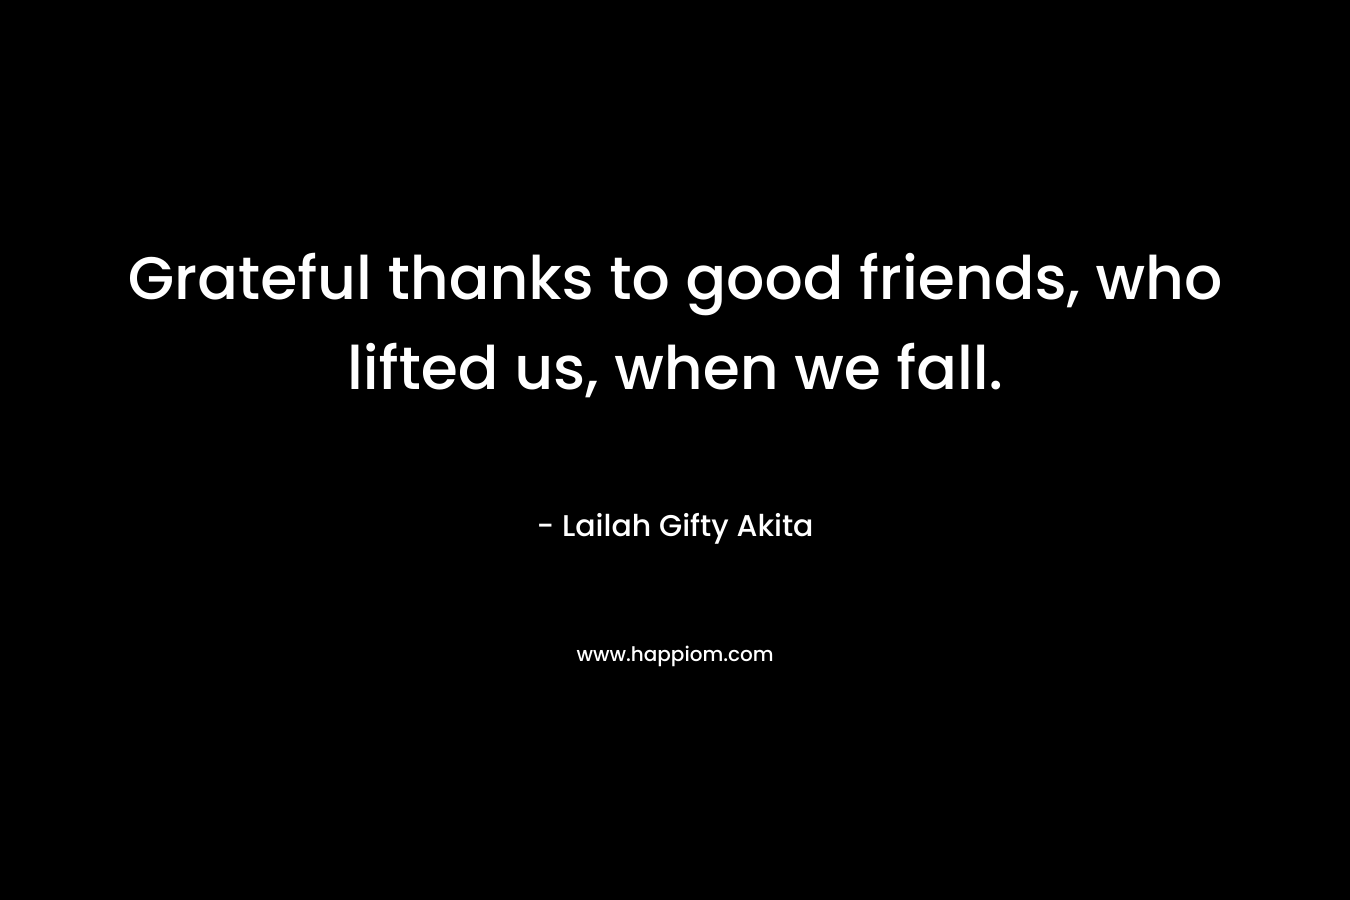 Grateful thanks to good friends, who lifted us, when we fall. – Lailah Gifty Akita